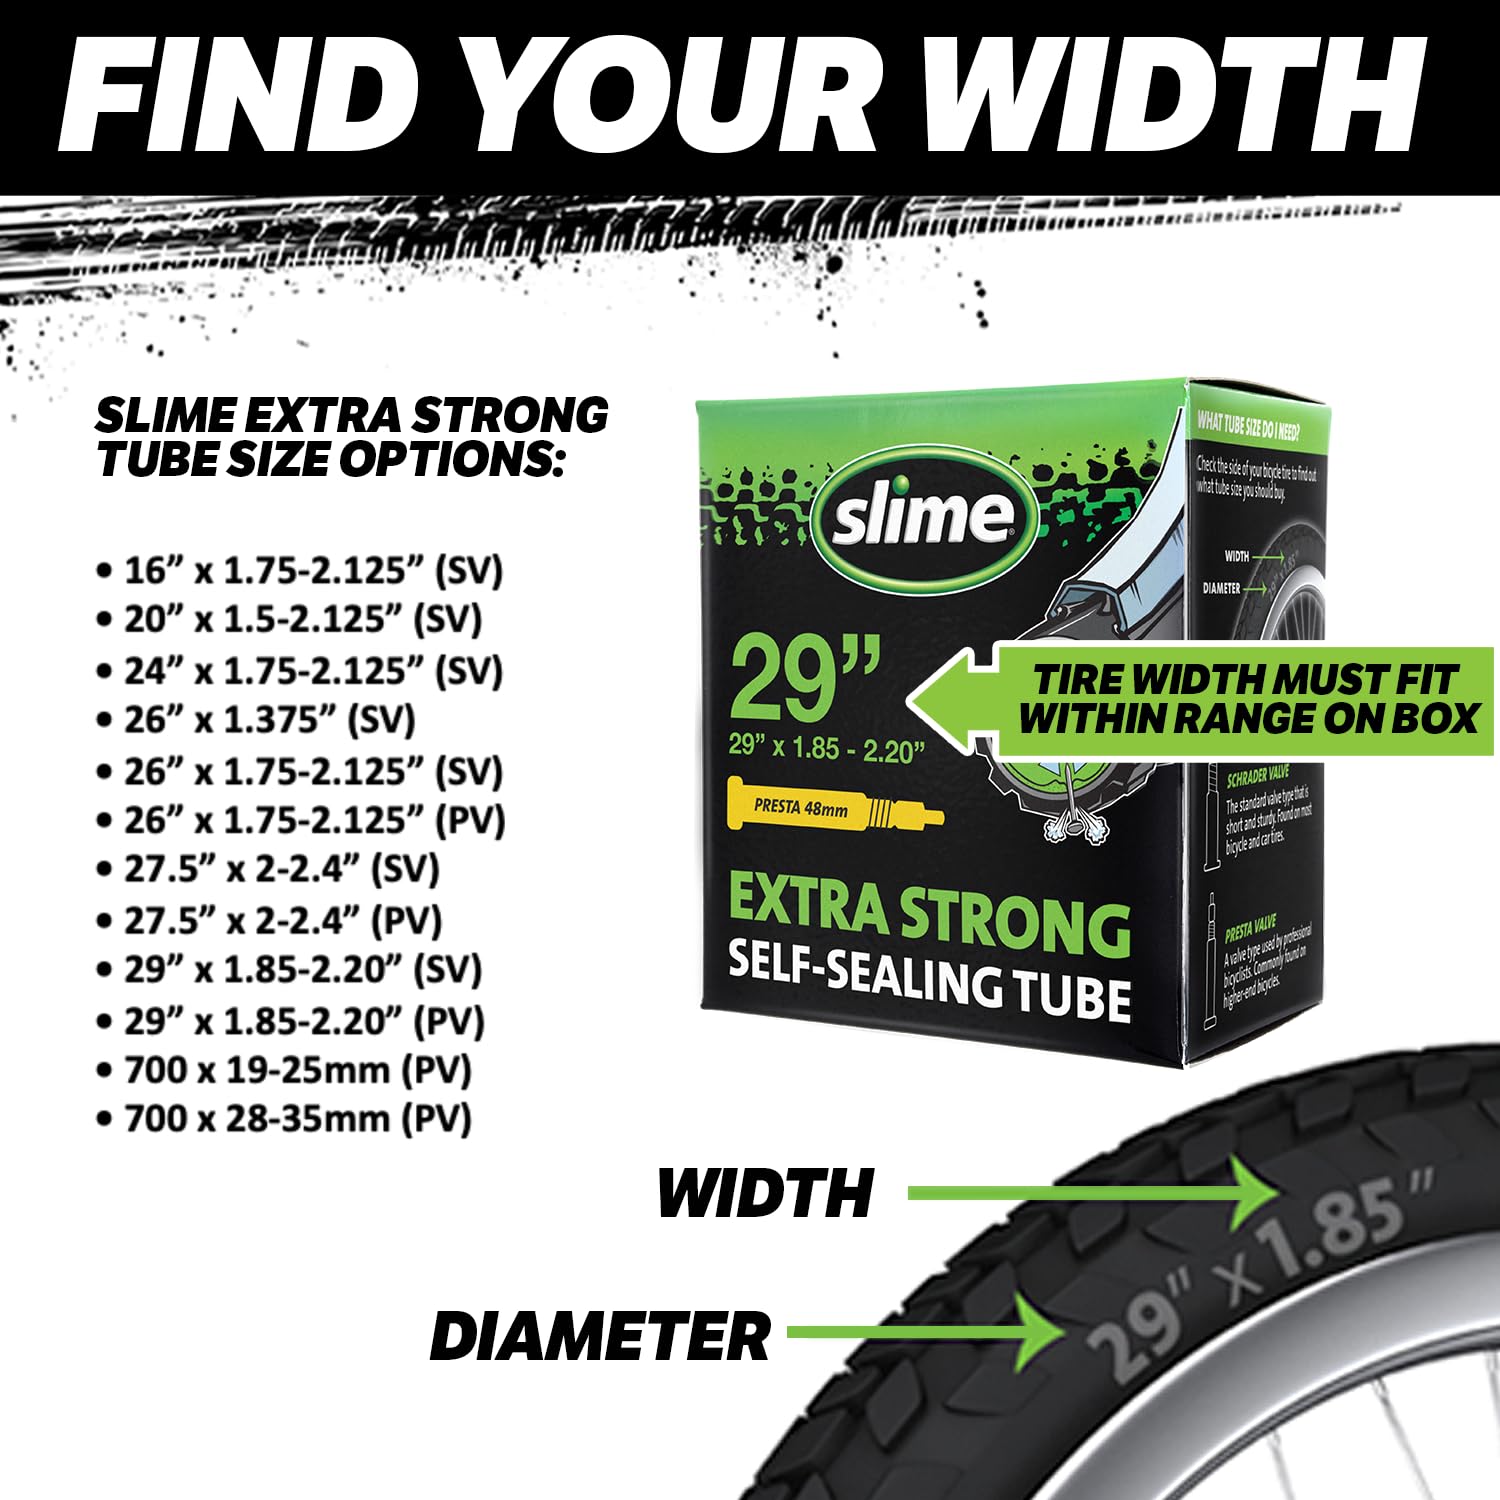 Slime 30045 Bike Inner Tube with Slime Puncture Sealant, Extra Strong, Self Sealing, Prevent and Repair